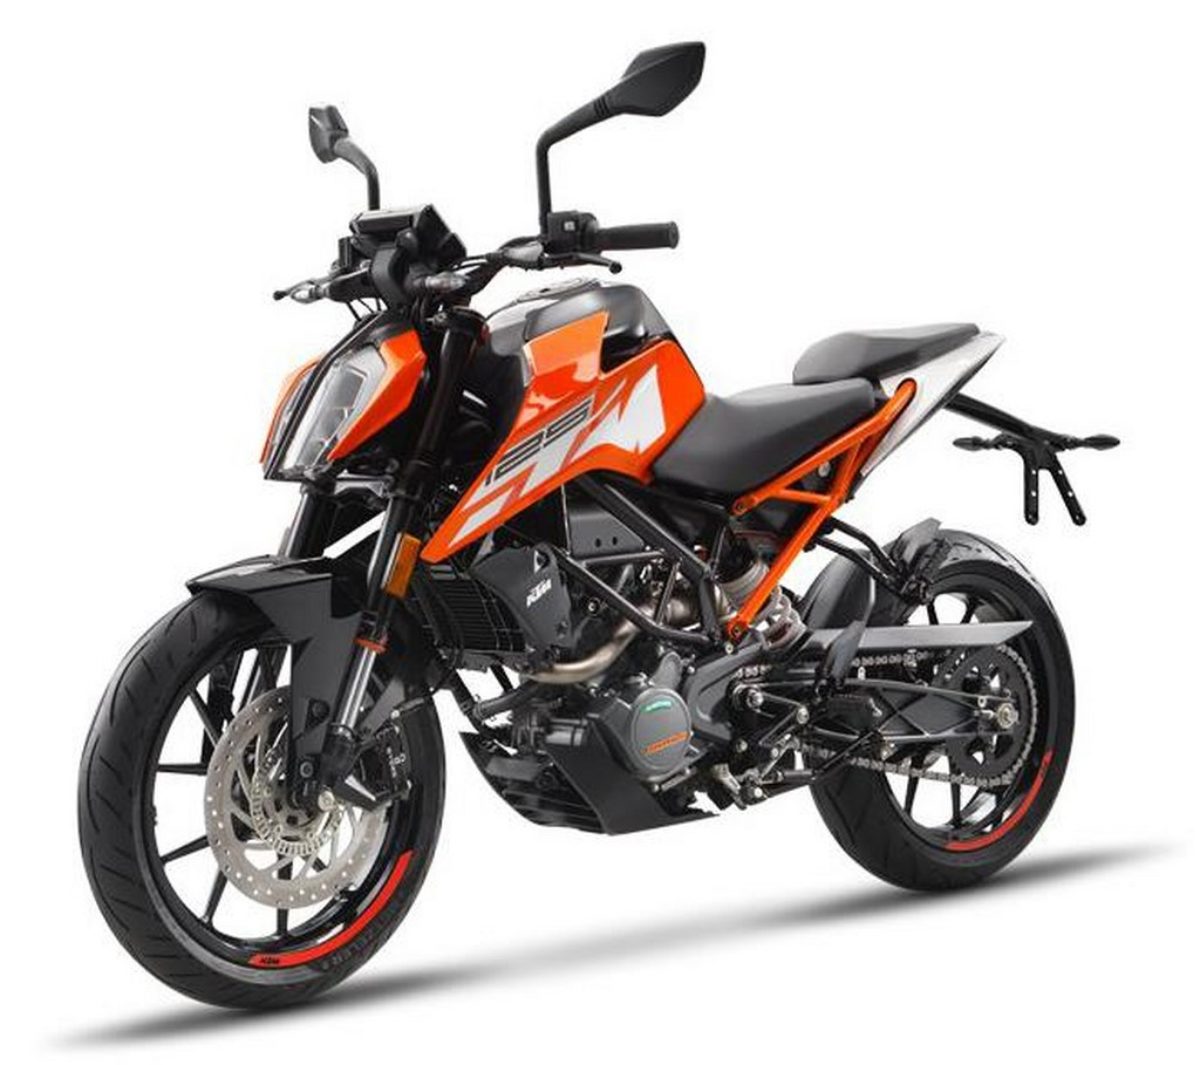 KTM launches updated 125 Duke, priced at Rs 1.5 lakh